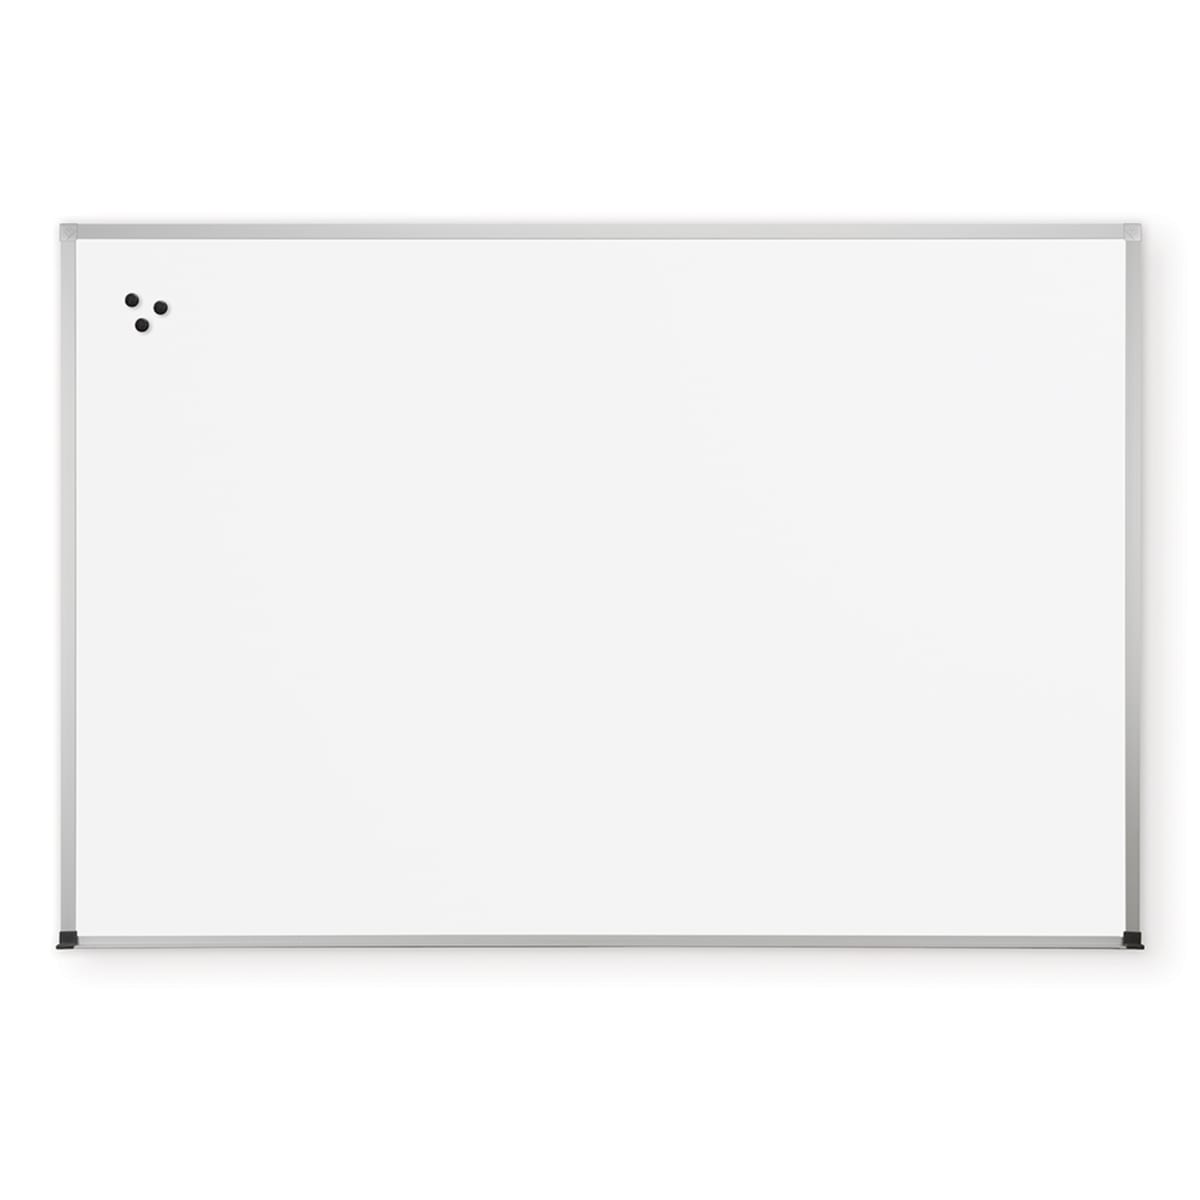 Mooreco Magne-Rite Markerboard with ABC Trim 2'H x 3'W (Mooreco 219NB) - SchoolOutlet